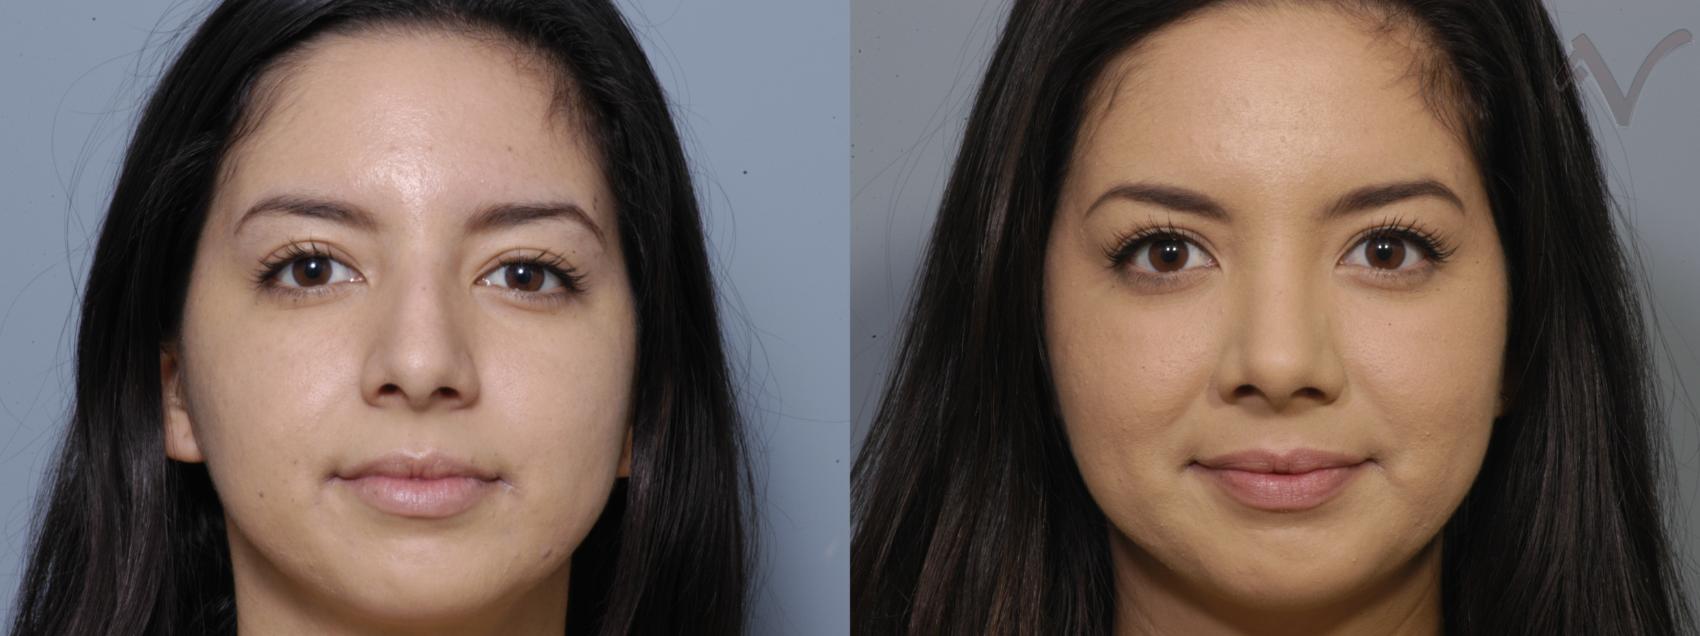 Before & After Rhinoplasty Case 2 Front View in Burbank, CA